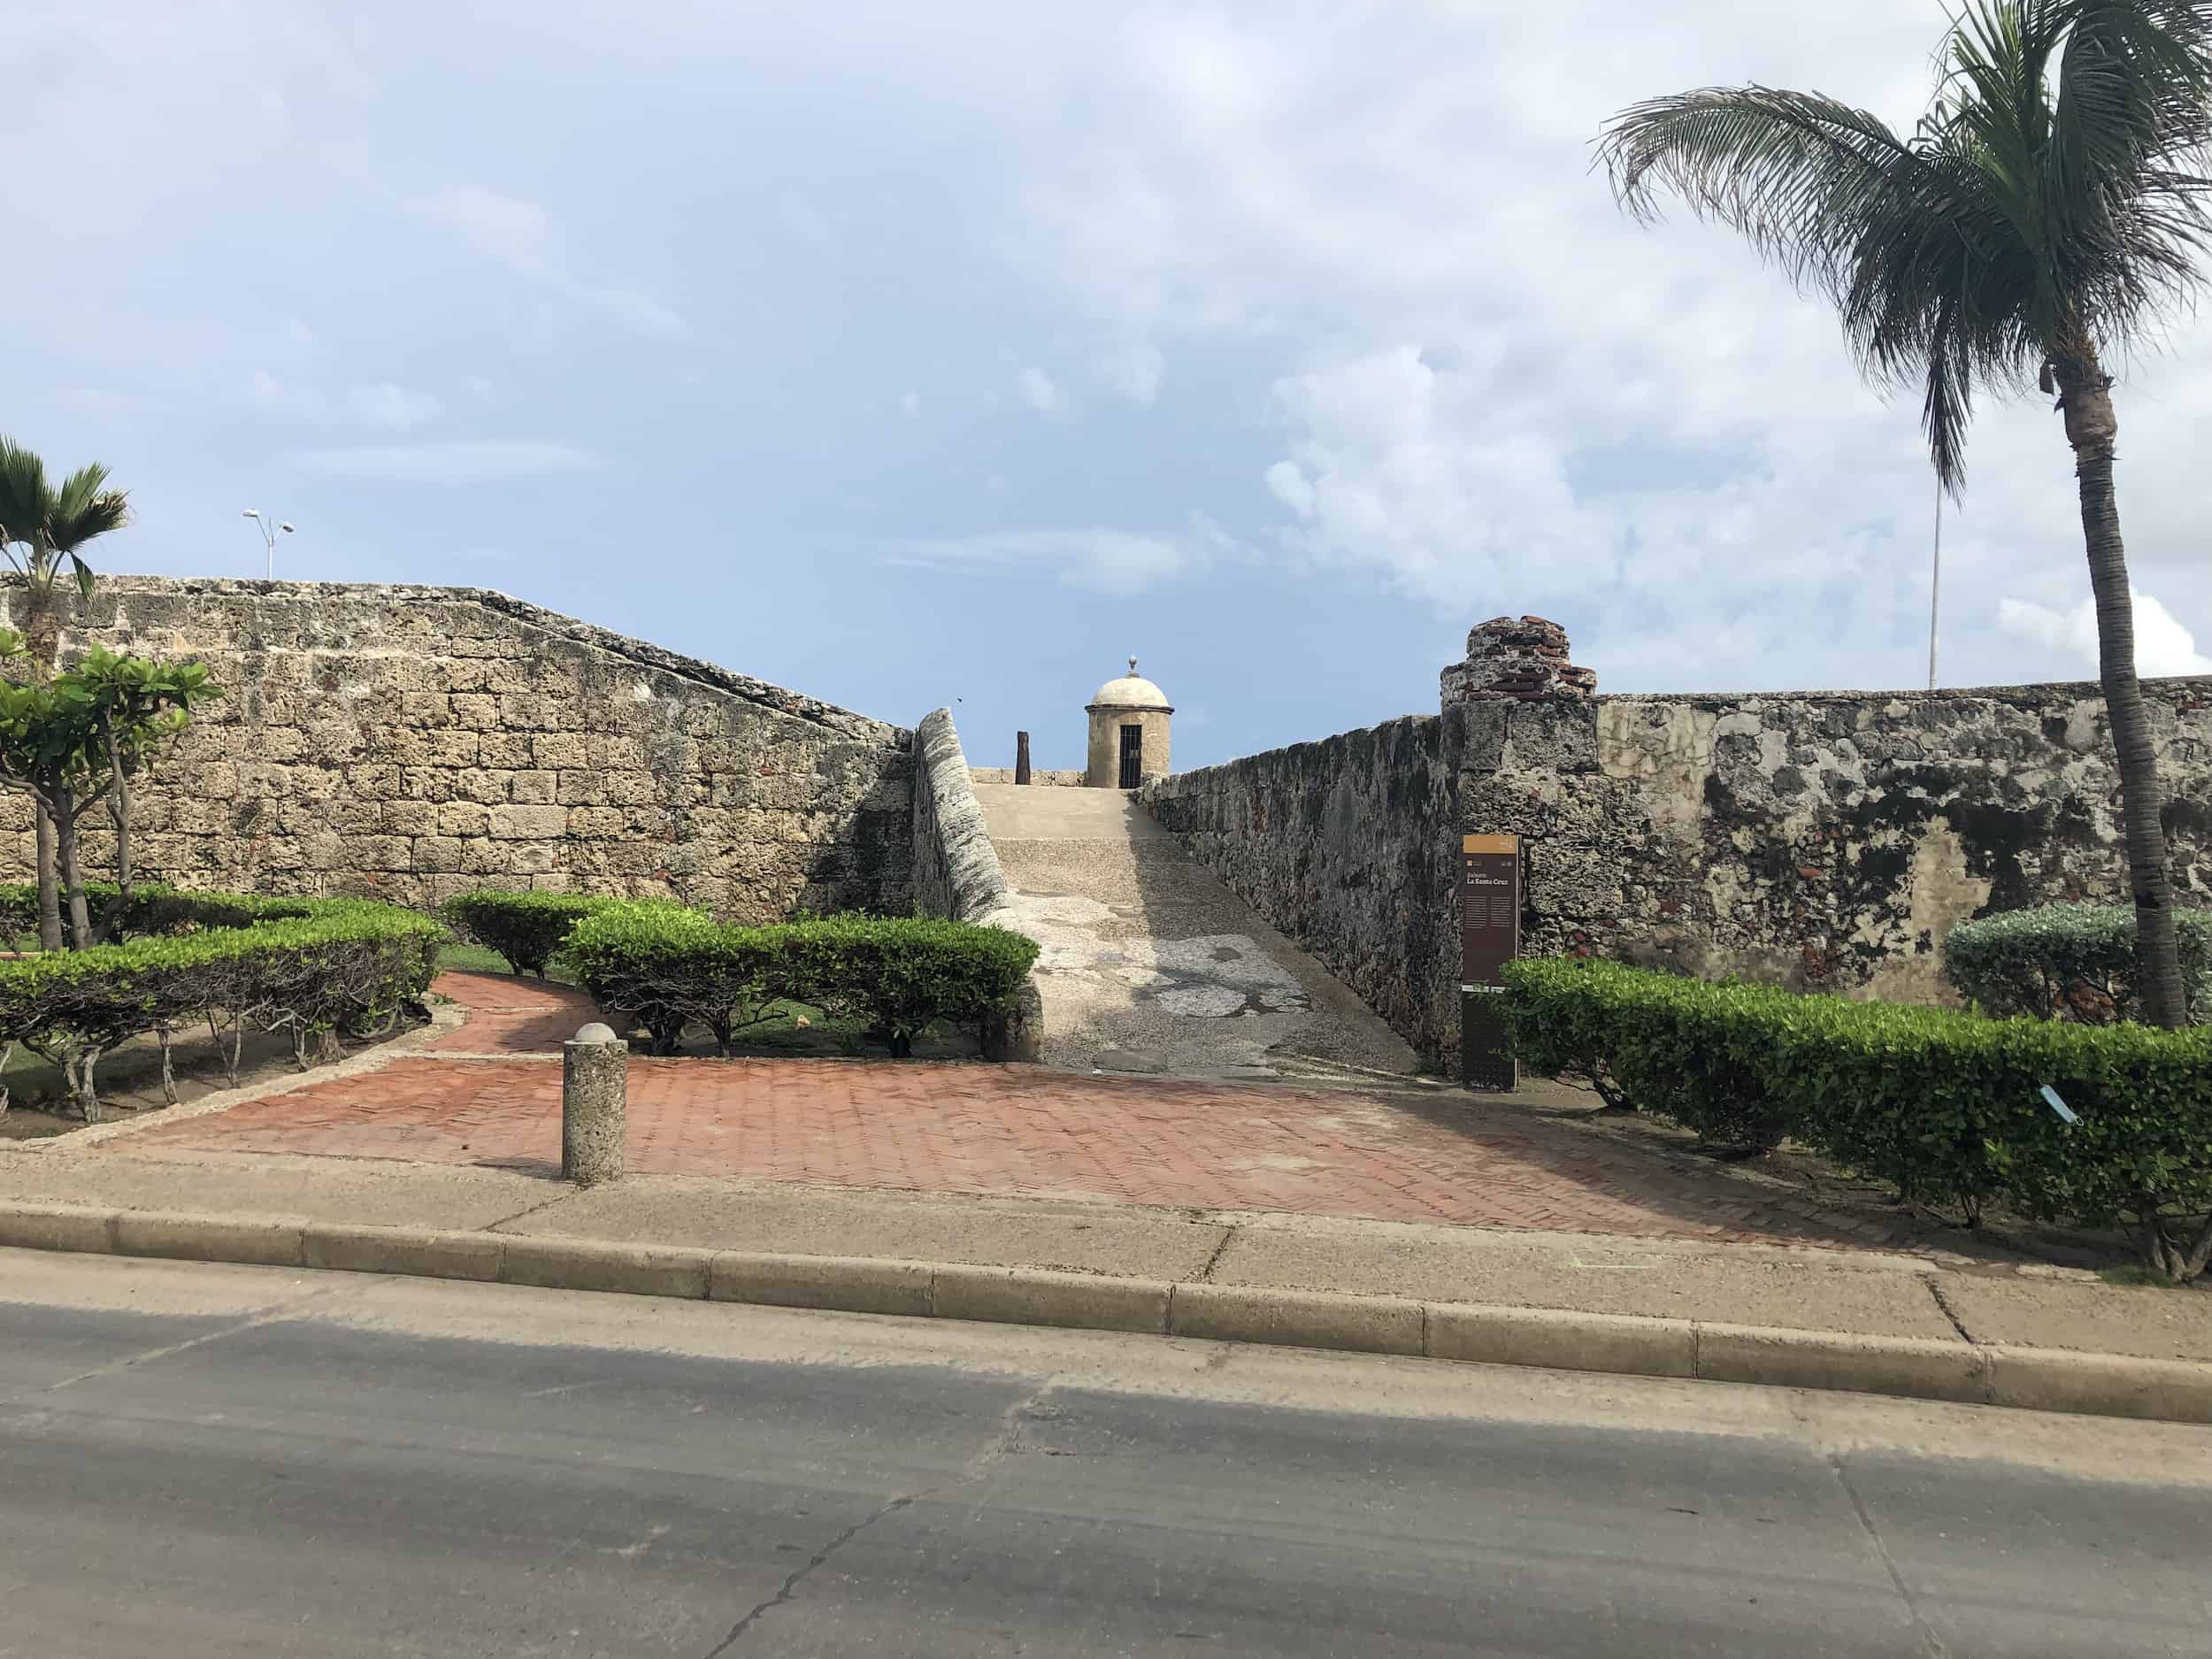 Ramp up to the Bastion of the Holy Cross on the Walls of Cartagena, Colombia